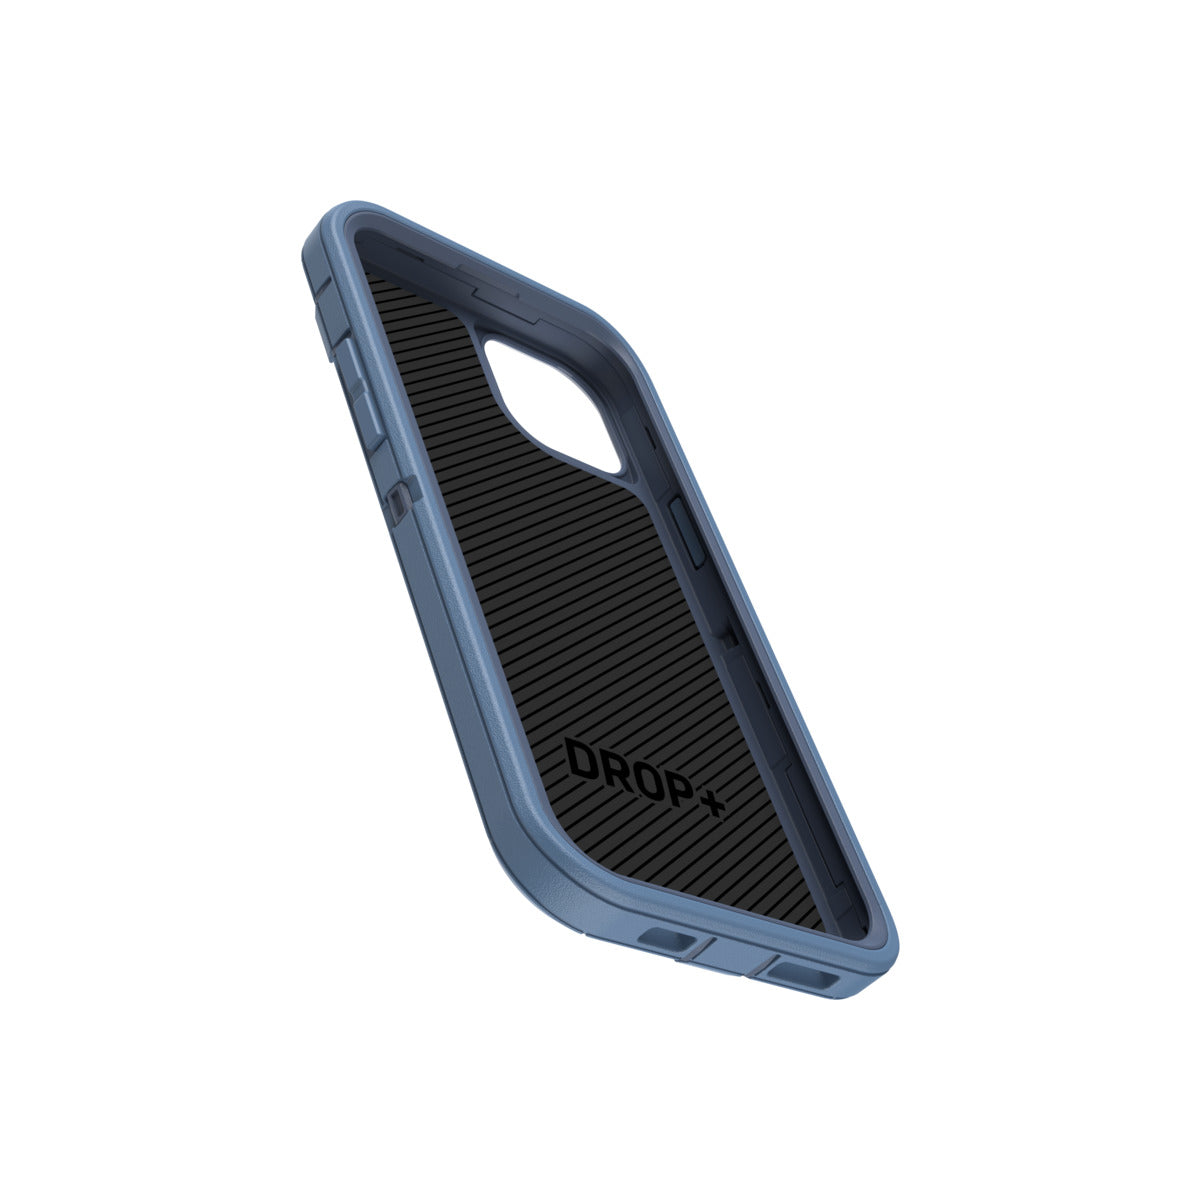 Otterbox Defender Series Phone Case for iPhone 15 Plus